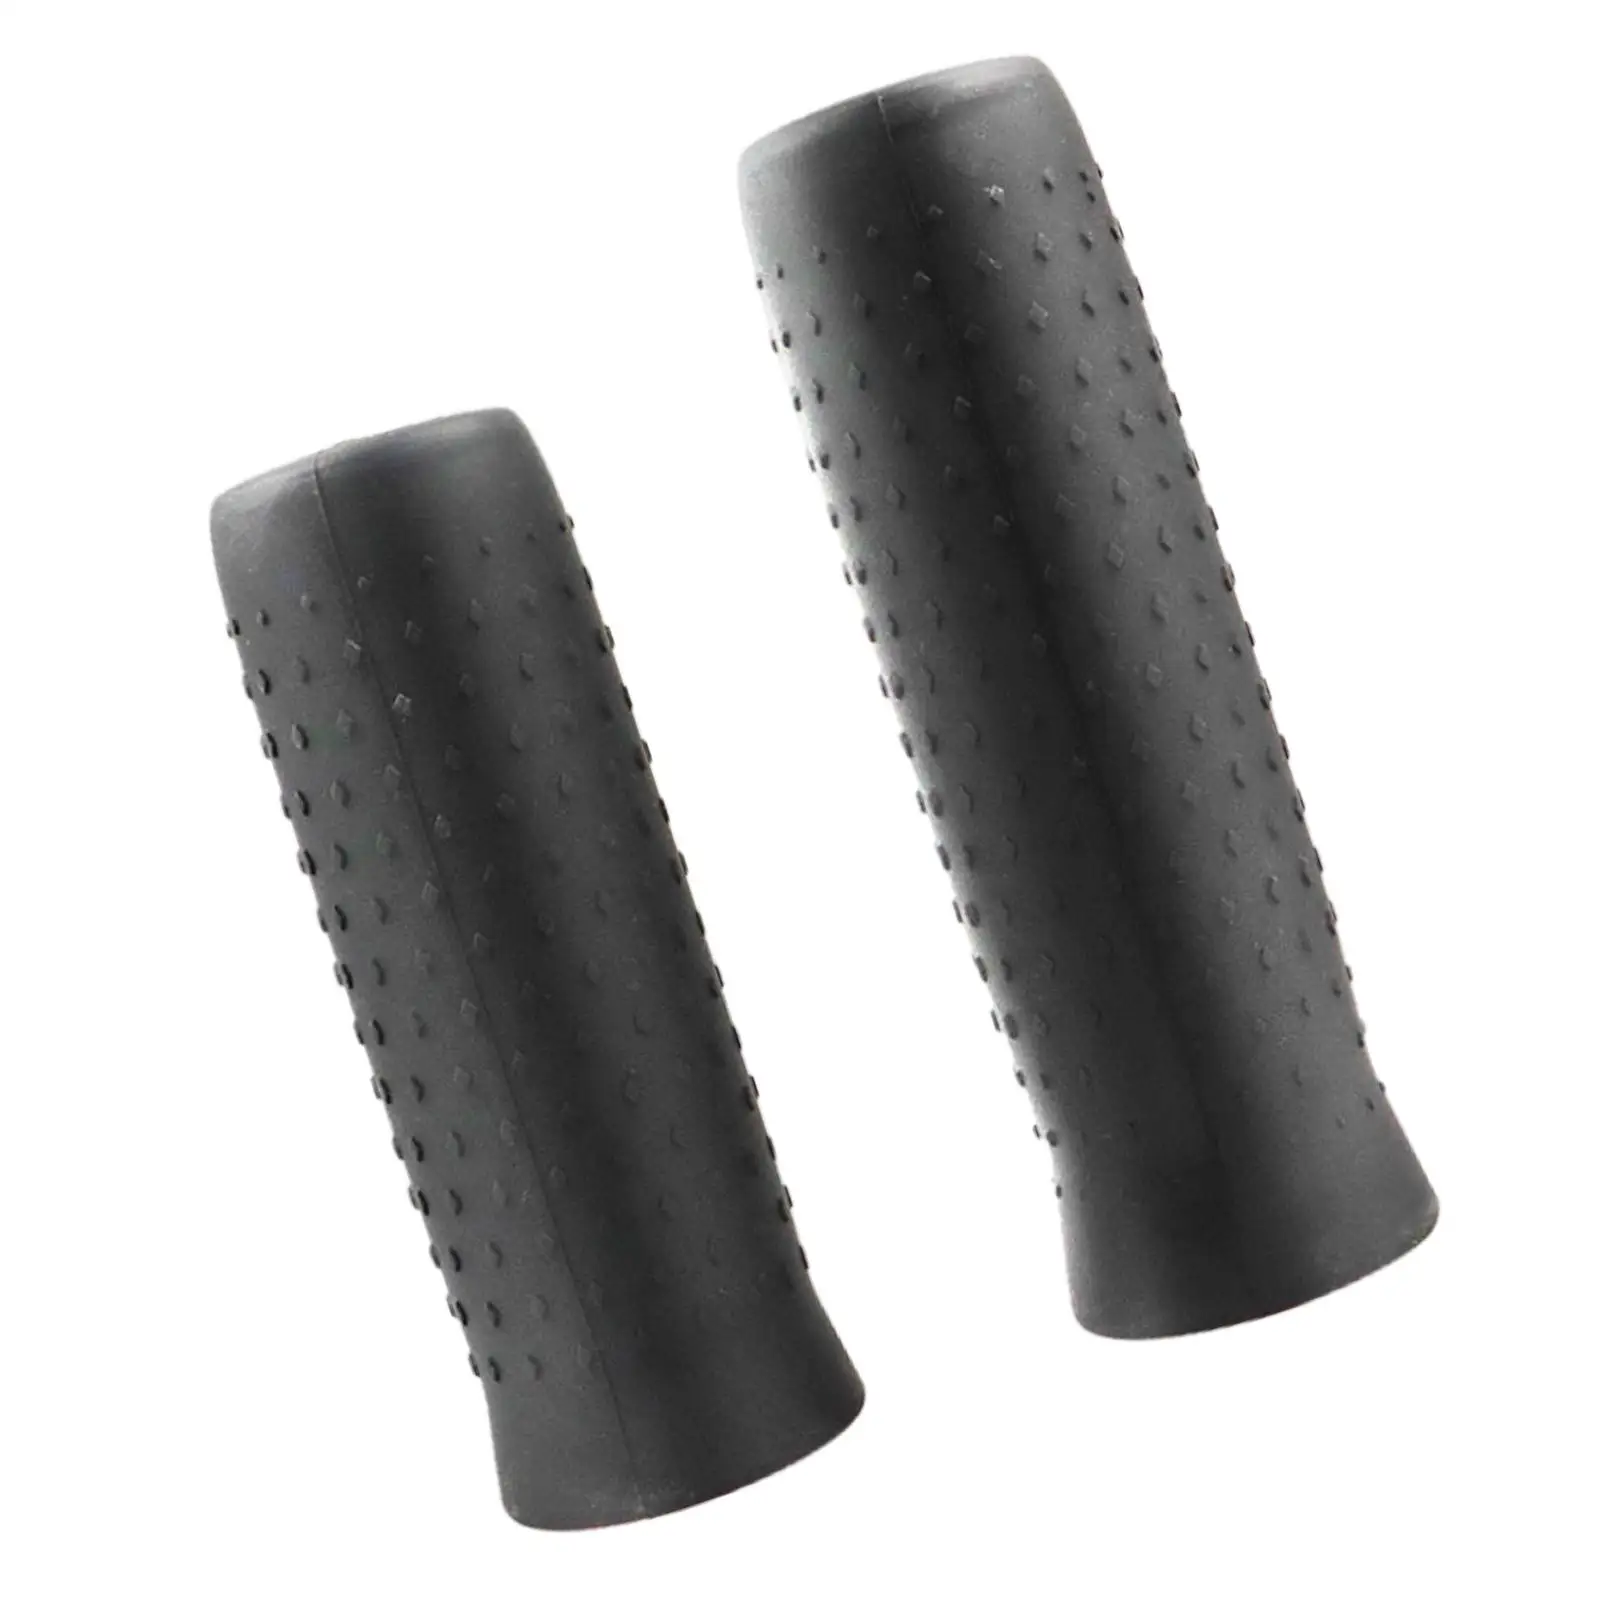 Electric Scooter Handlebar Grips Handle Grips Handlebar Cover Replace Protector Accessory Rubber Handle Grips Sleeve for Max G30